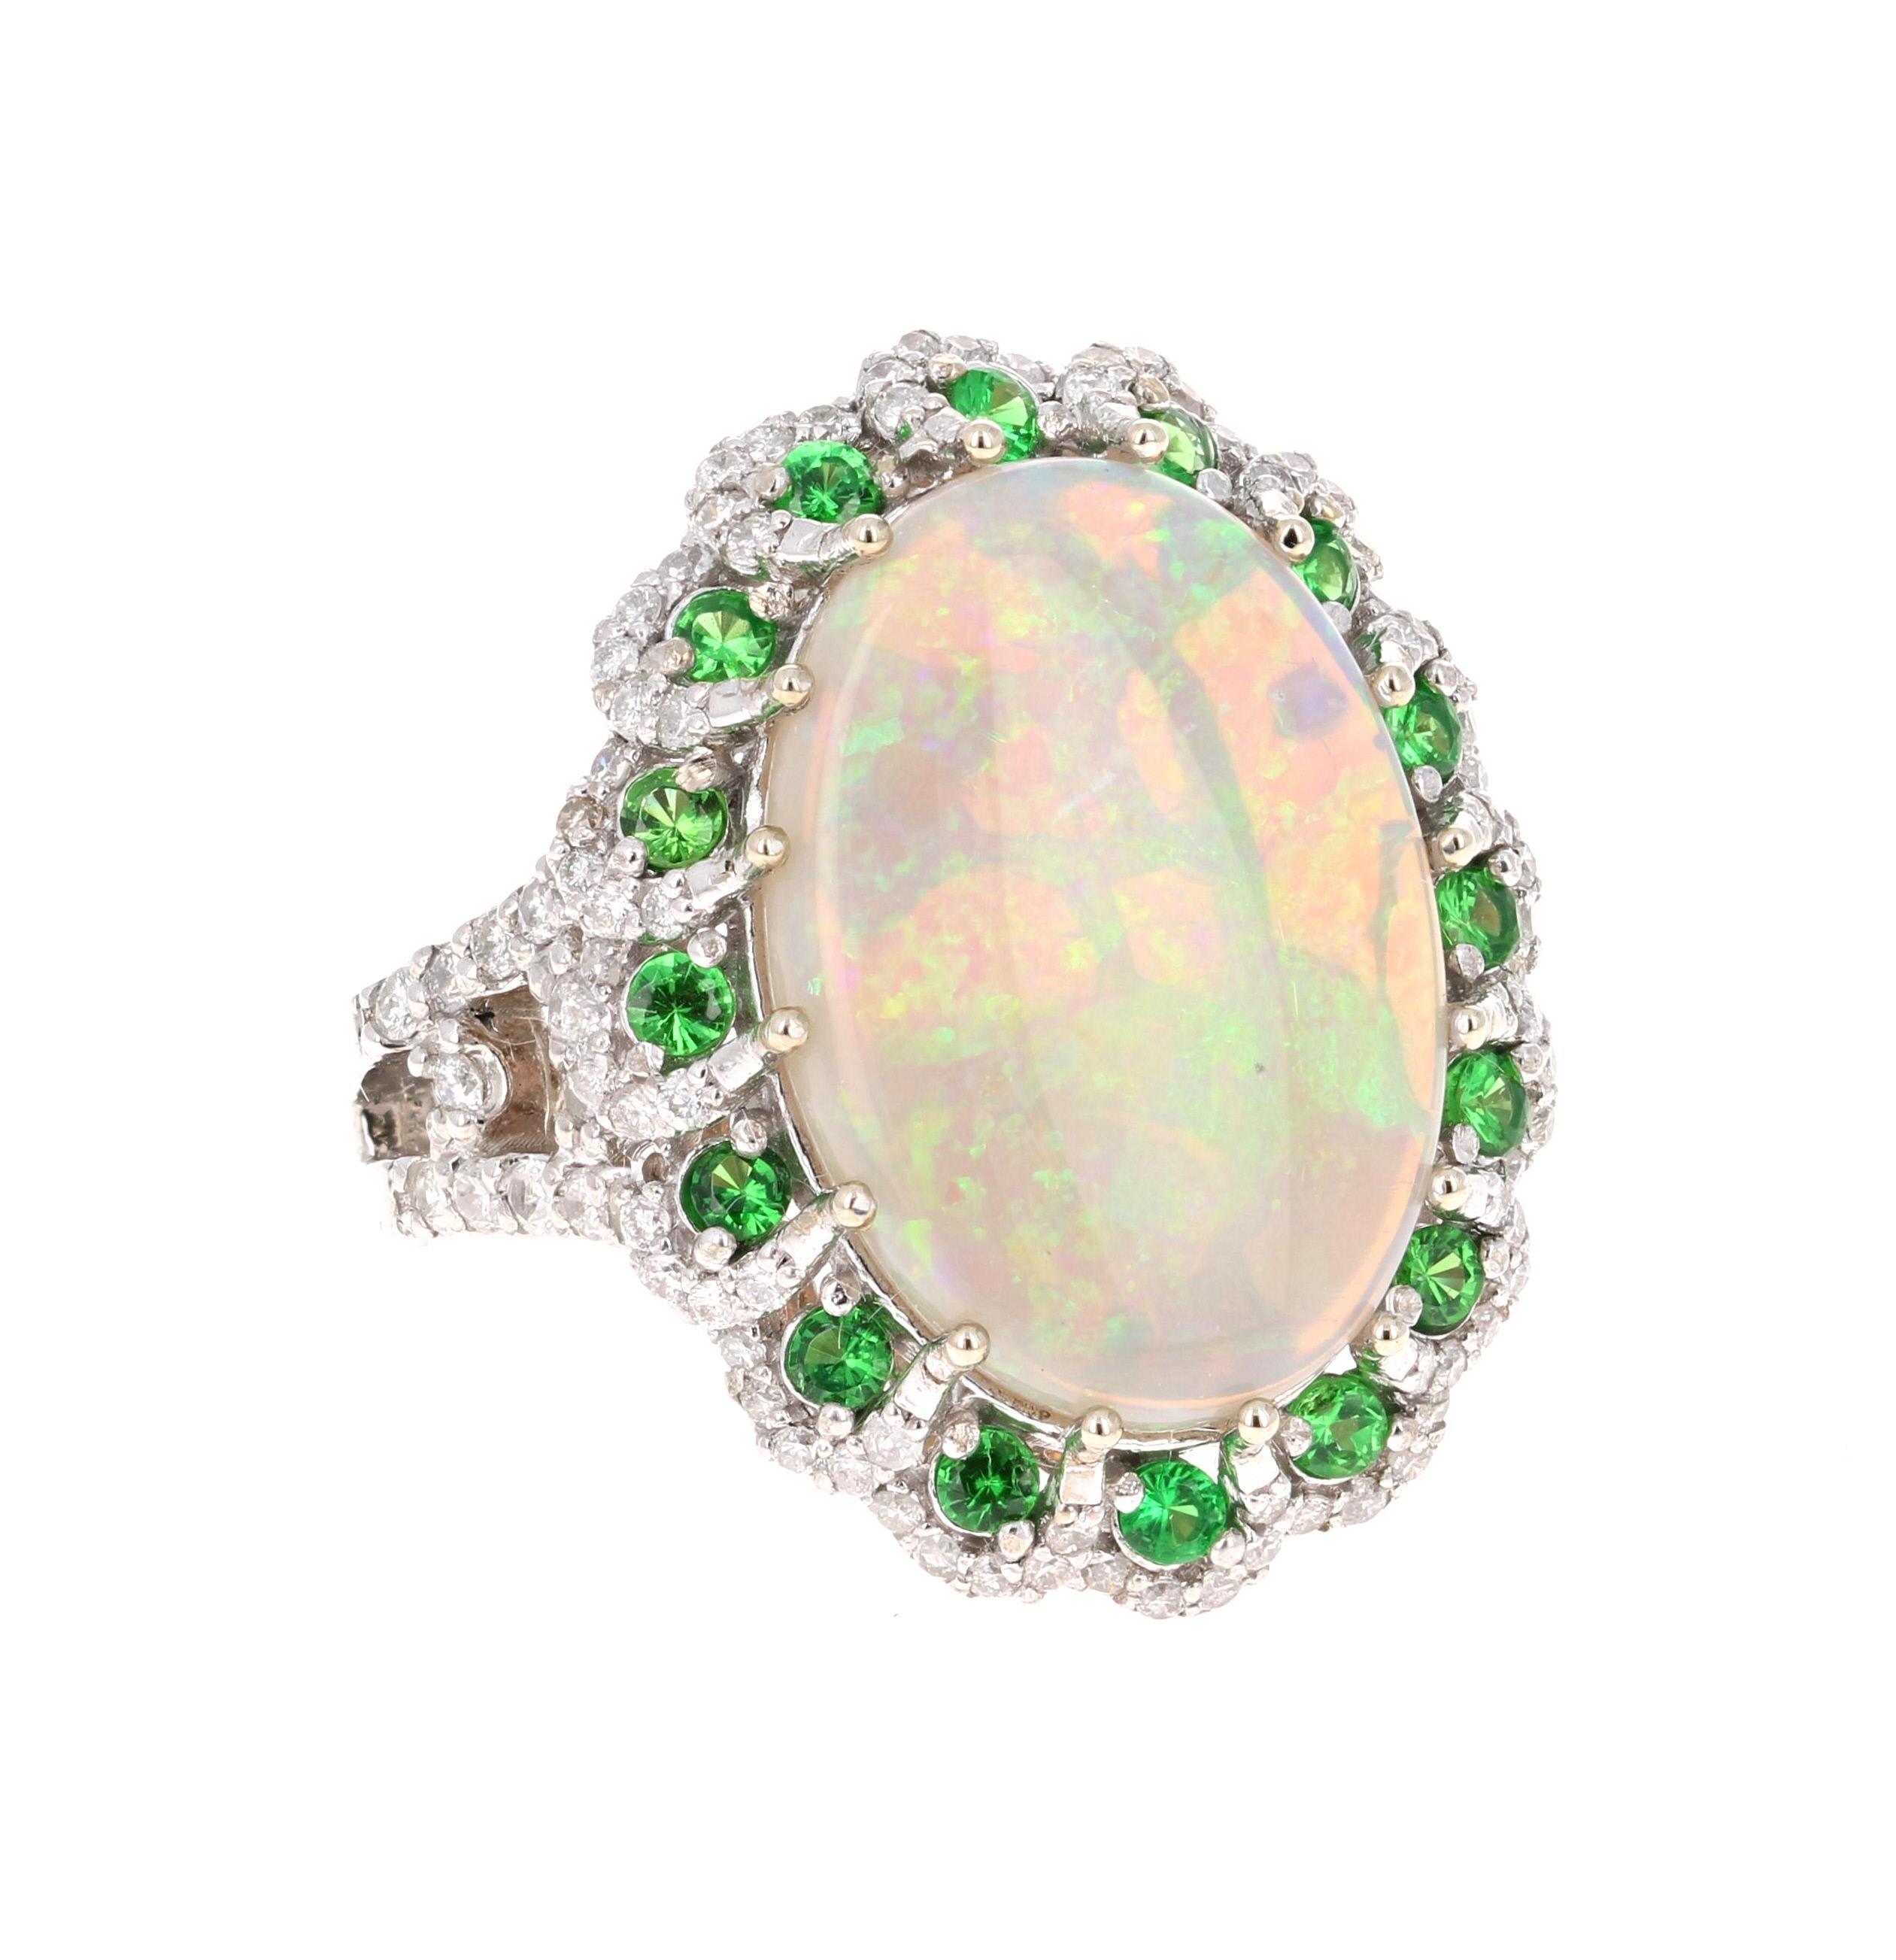 Stunning and uniquely designed 6.68 Carat Oval Cut Opal Diamond White Gold Ring with Tsavorite accents!

The Oval Cut Opal in the center of the ring weighs 5.37 carats.  It is surrounded by accents of 16 Round Cut Tsavorites that weigh 0.62 carats. 